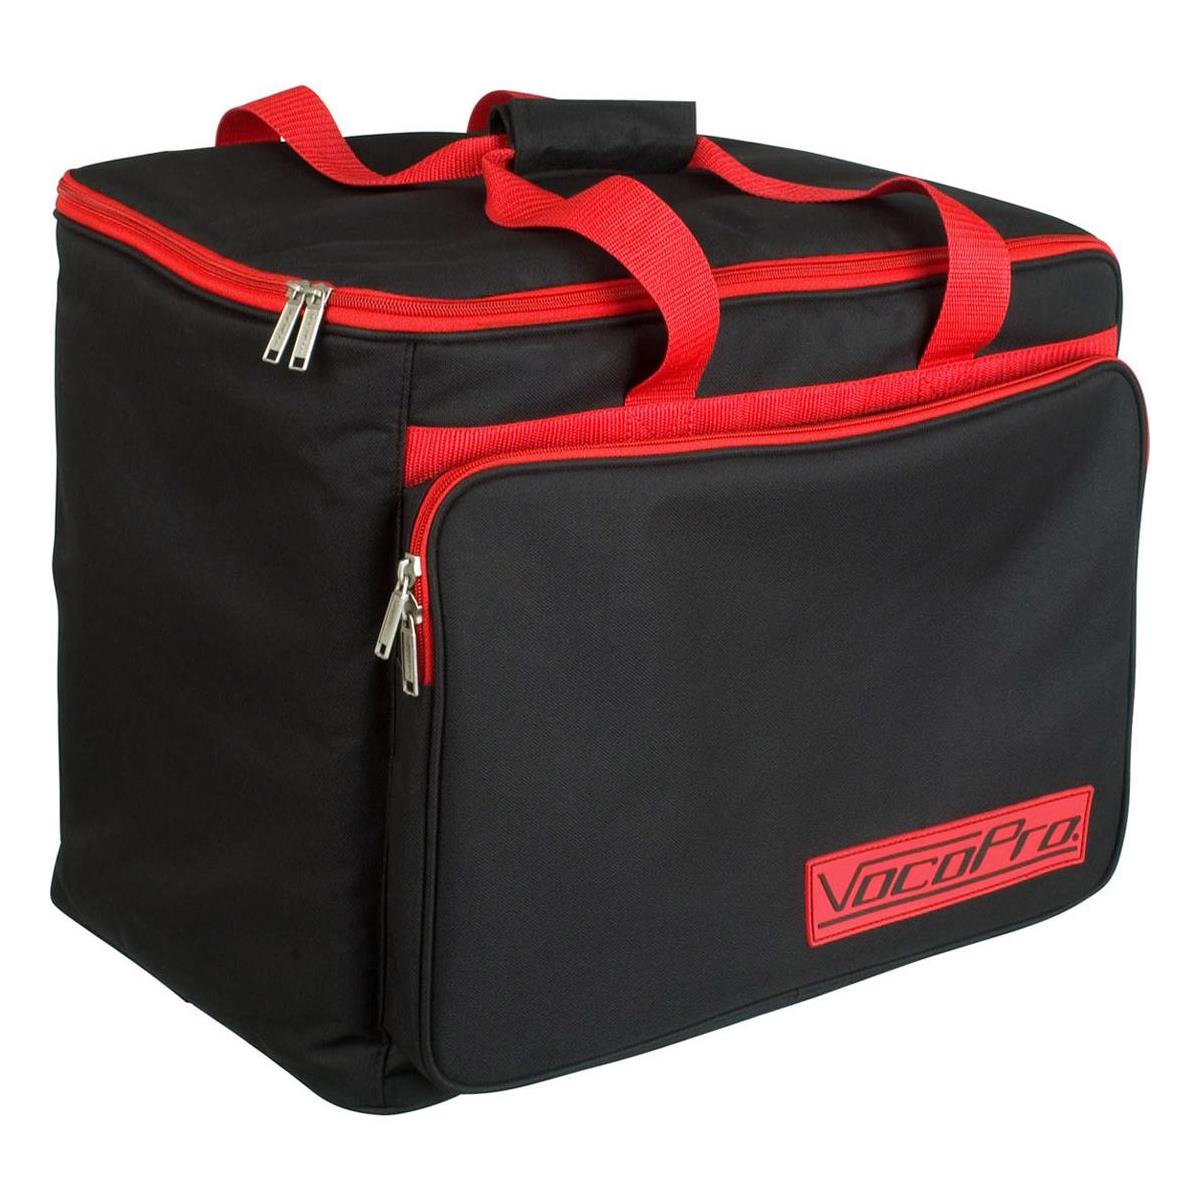 Image of VocoPro BAG-34 Heavy Duty Carrying Bag